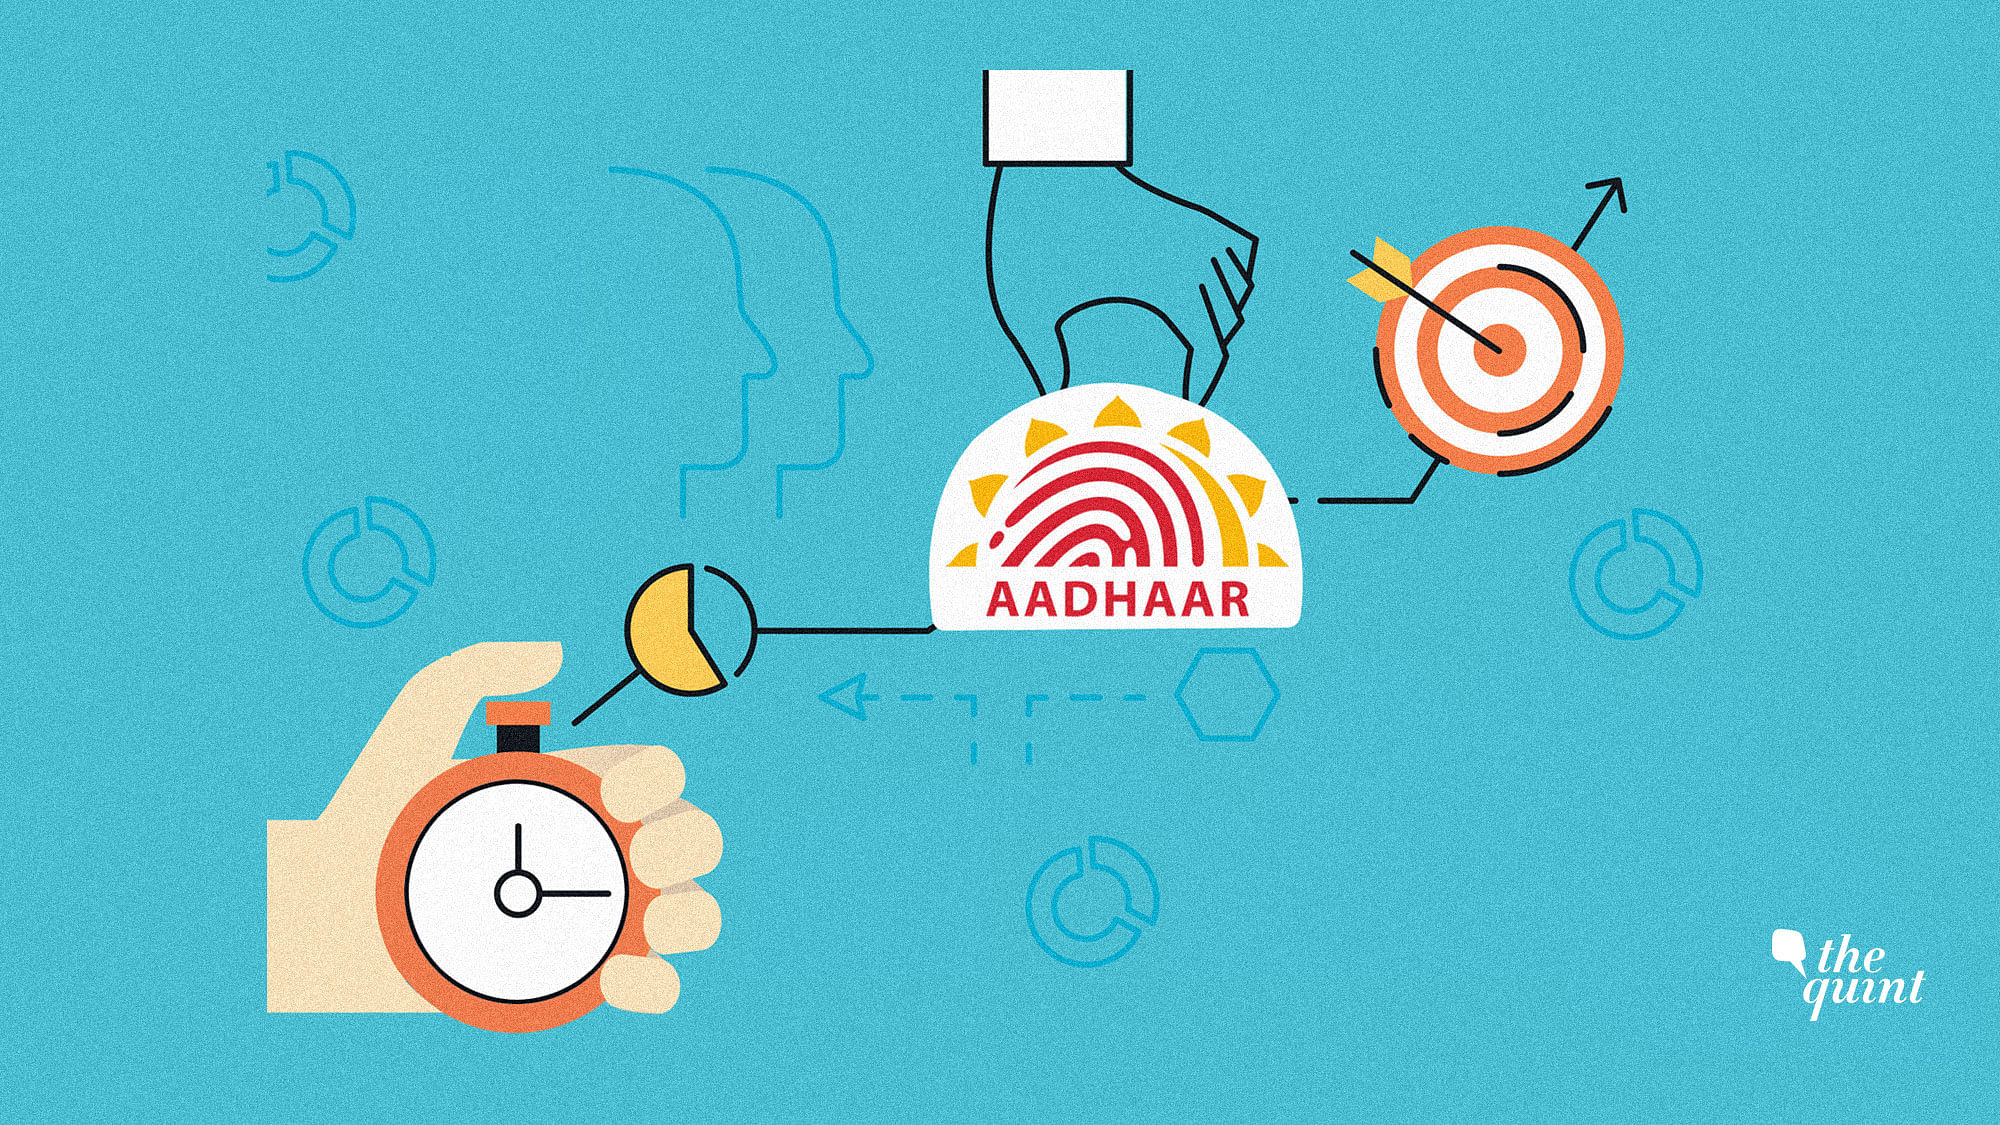 By denying basic services, Aadhaar is doing a disservice to the very people whose interests it’s supposed to protect.